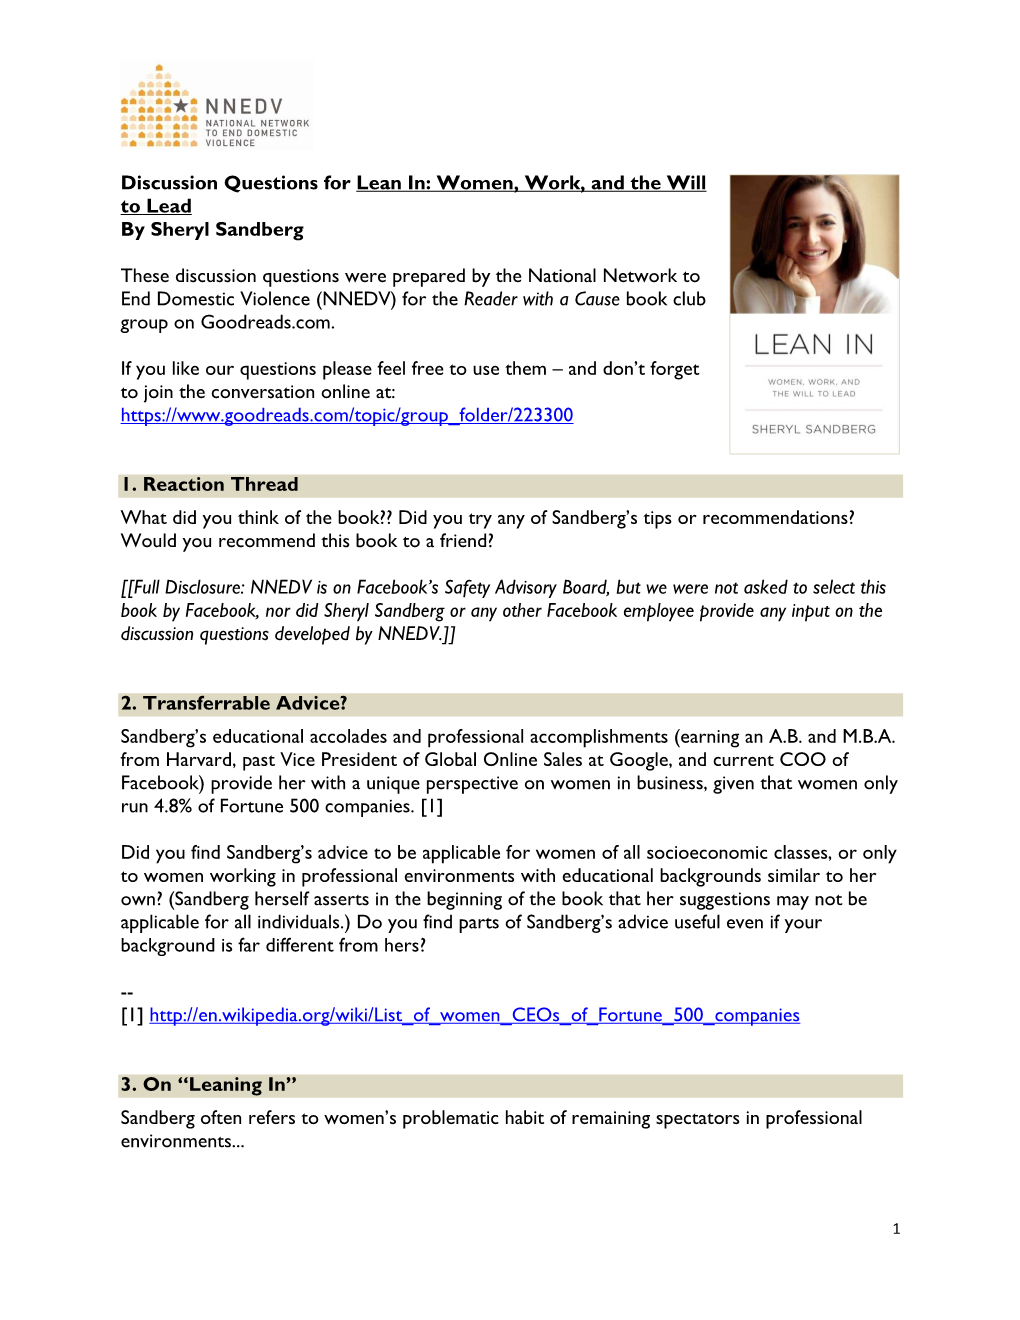 Discussion Questions for Lean In: Women, Work, and the Will to Lead by Sheryl Sandberg